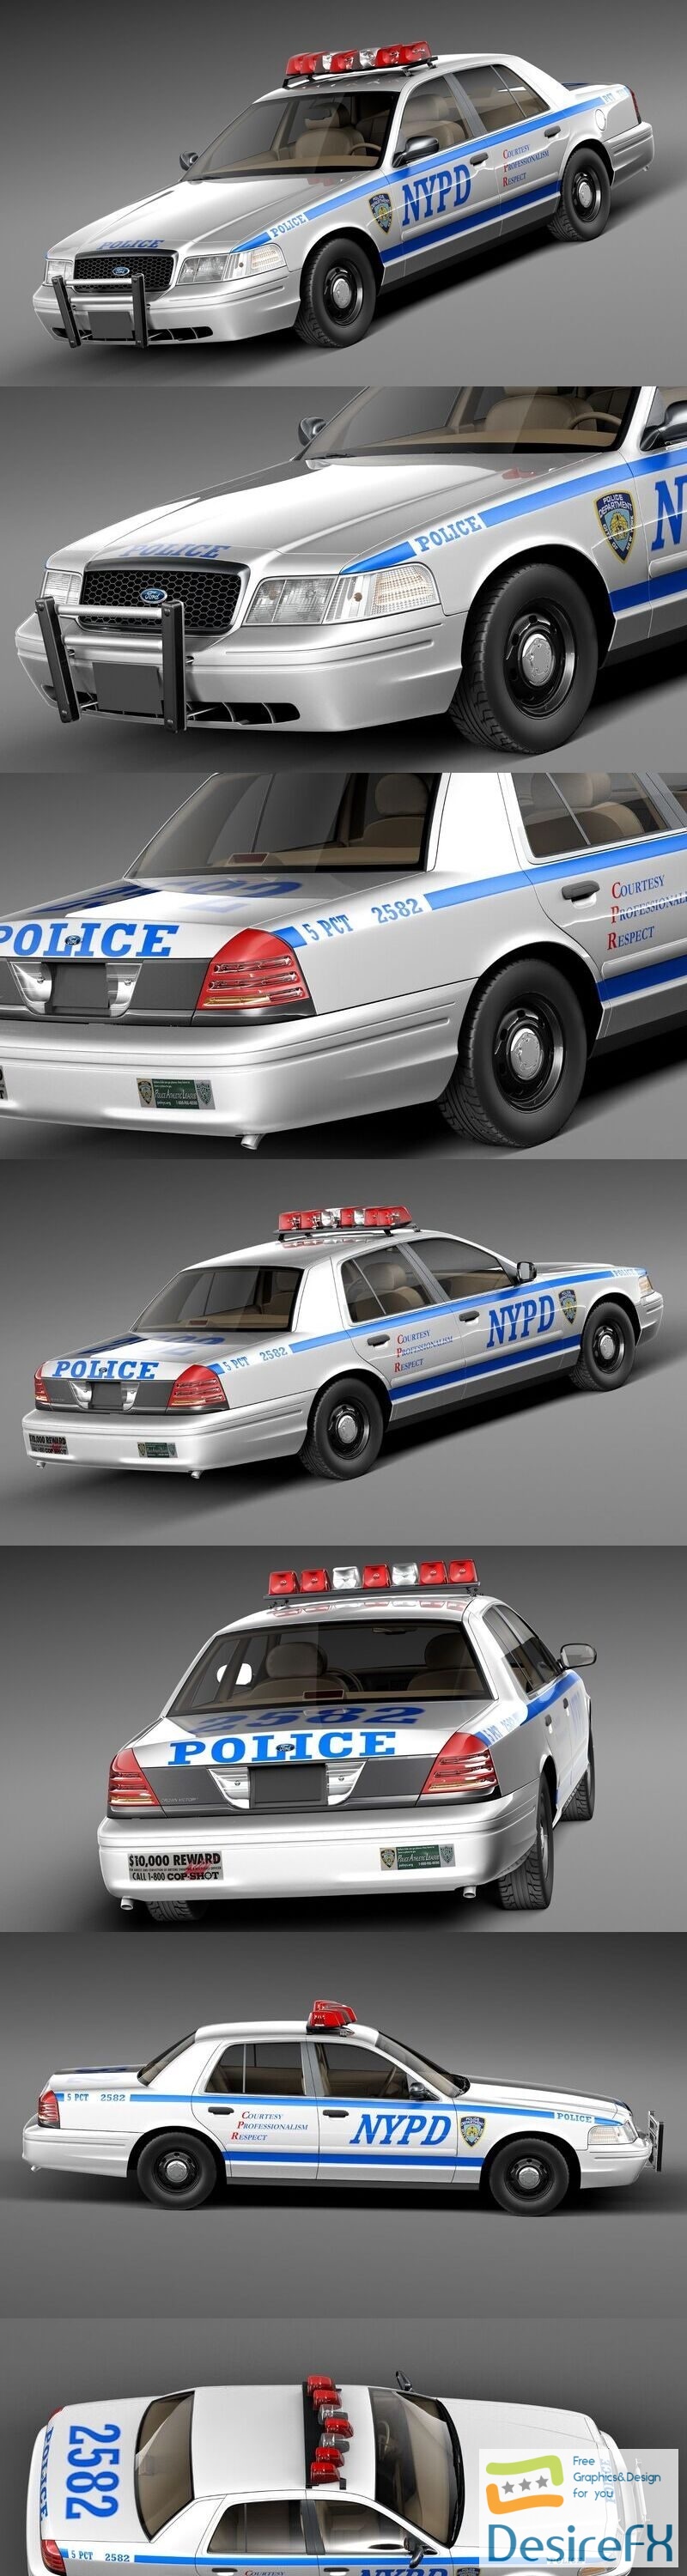 Ford Crown Victoria Police Car 1998-2011 3D Model